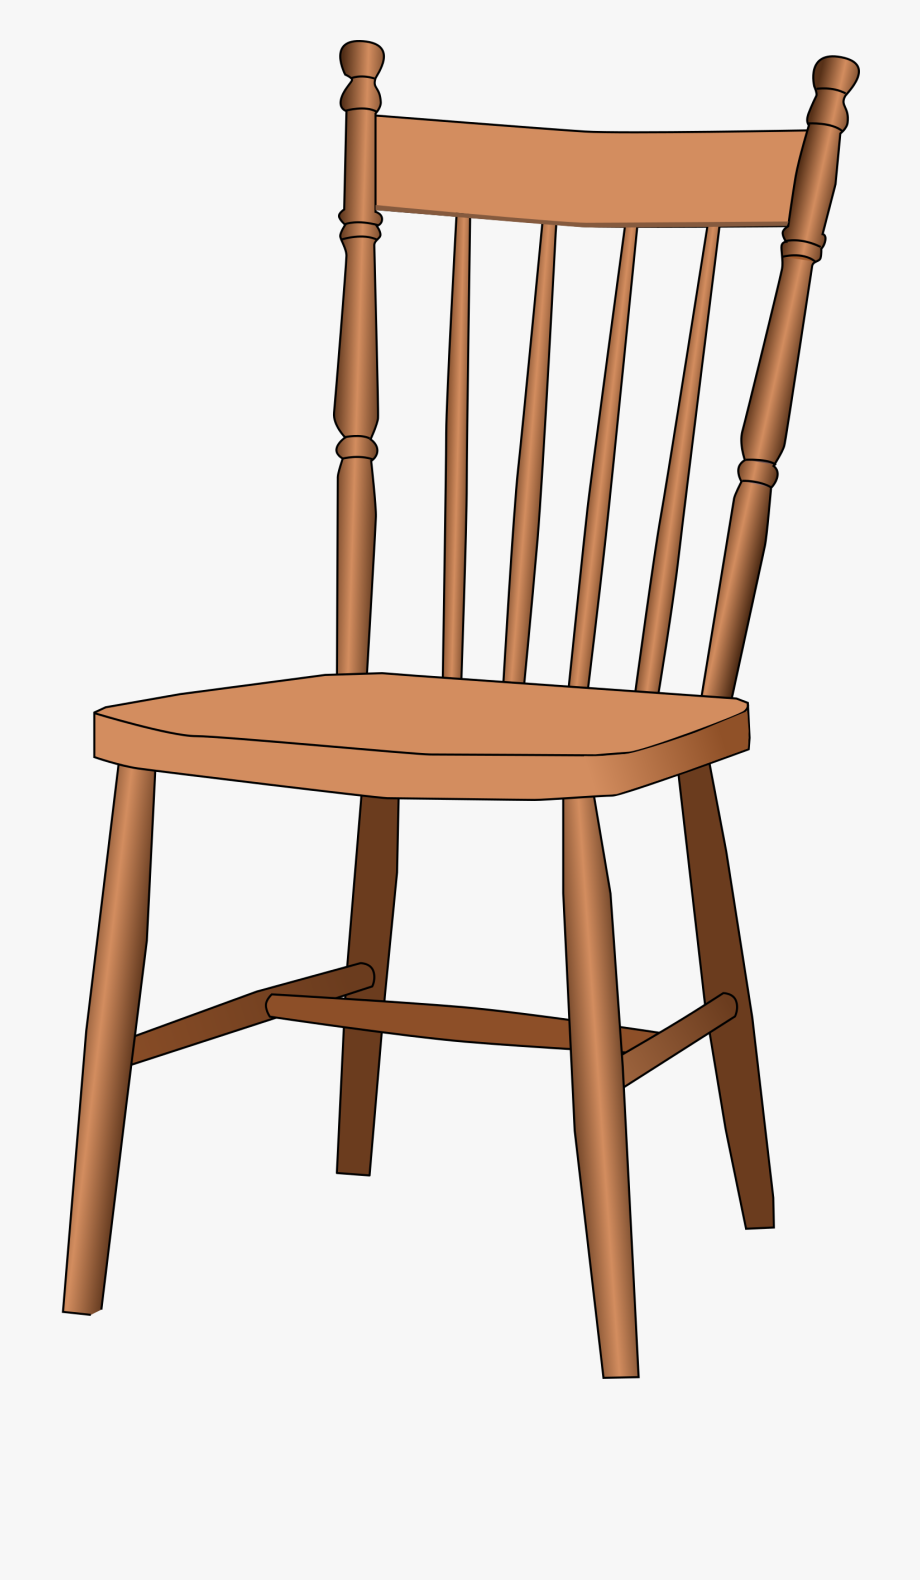 Chair Png Cartoon : Download and use them in your website, document or ...